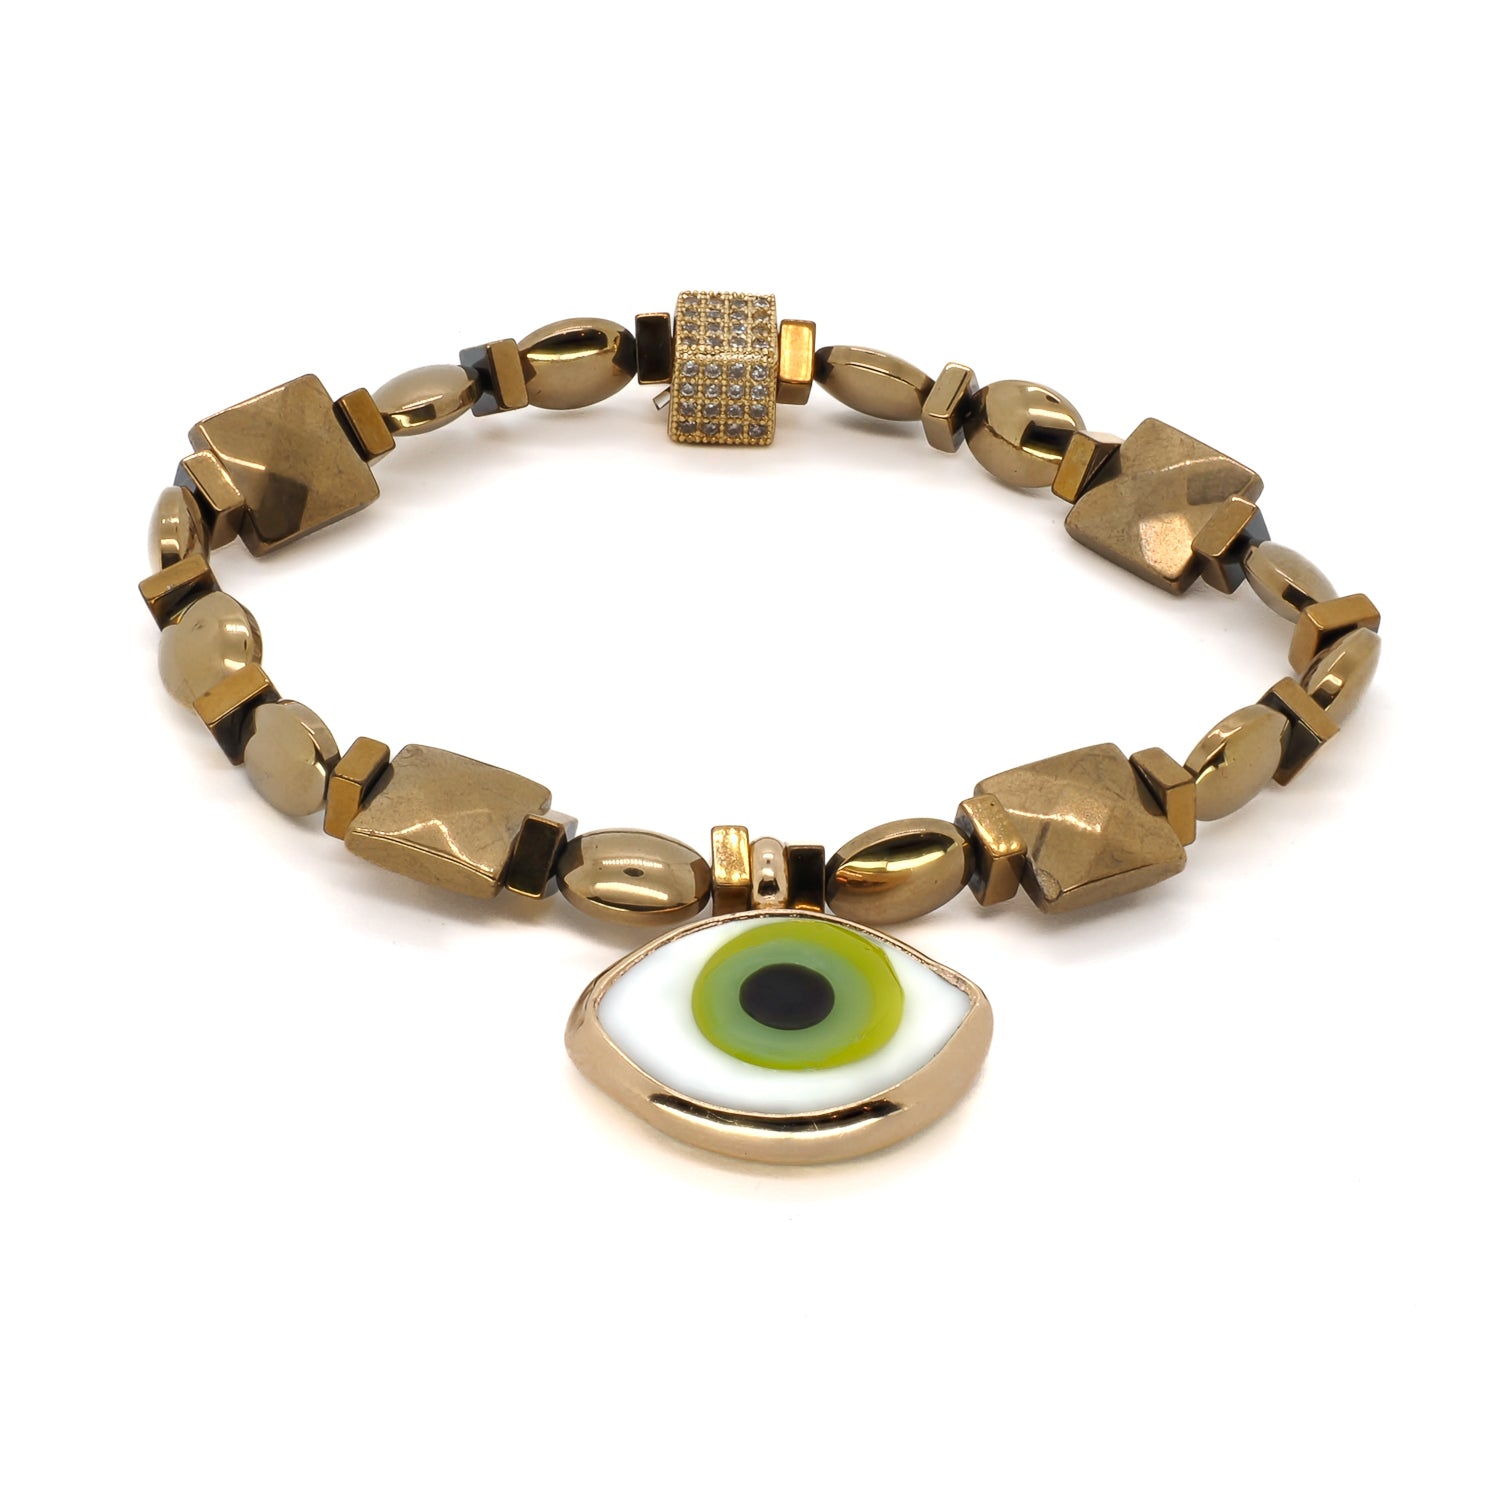 A close-up view of the Green Eye Vitality Bracelet, showcasing the intricate details of the gold color hematite stone square beads, gold color hematite stone beads, and the square gold plated bead with Swarovski crystals. 